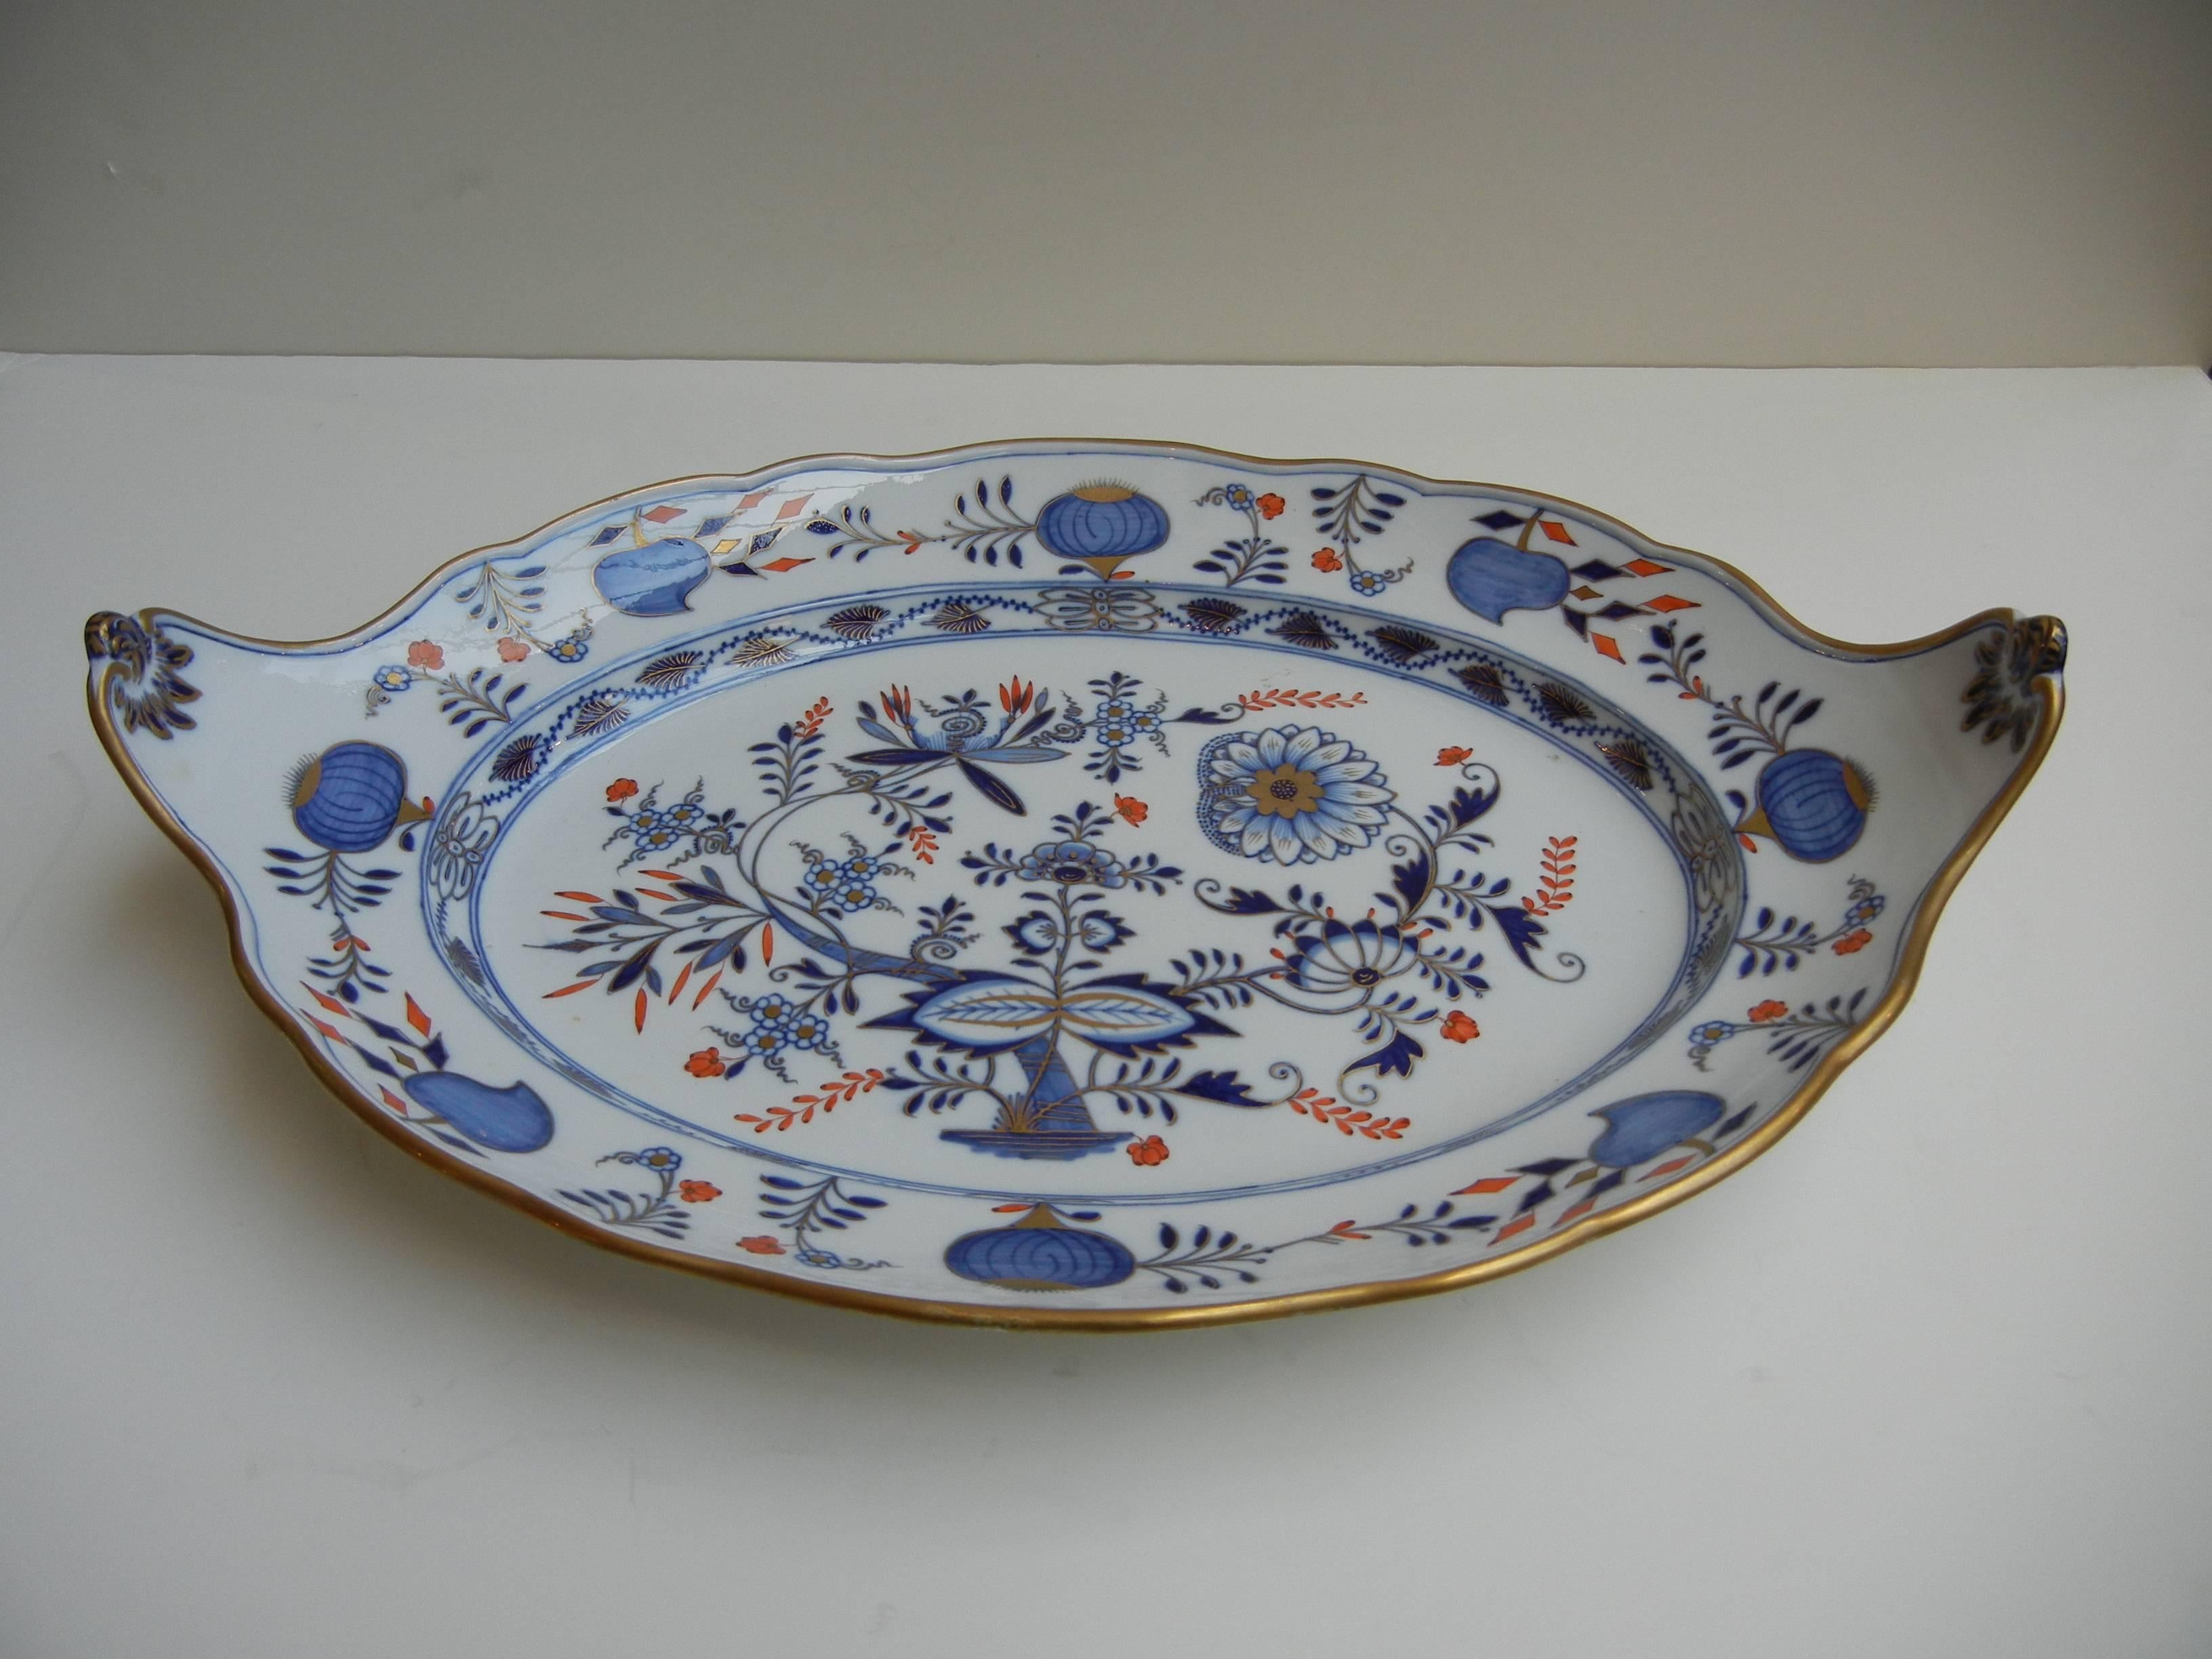 This beautiful Meissen platter is also hand decorated in gold and rust overtop the glaze of the blue onion pattern.

The shape is unusual with the two ends curved and raised as handles.

Early crossed swords mark on reverse.

Excellent